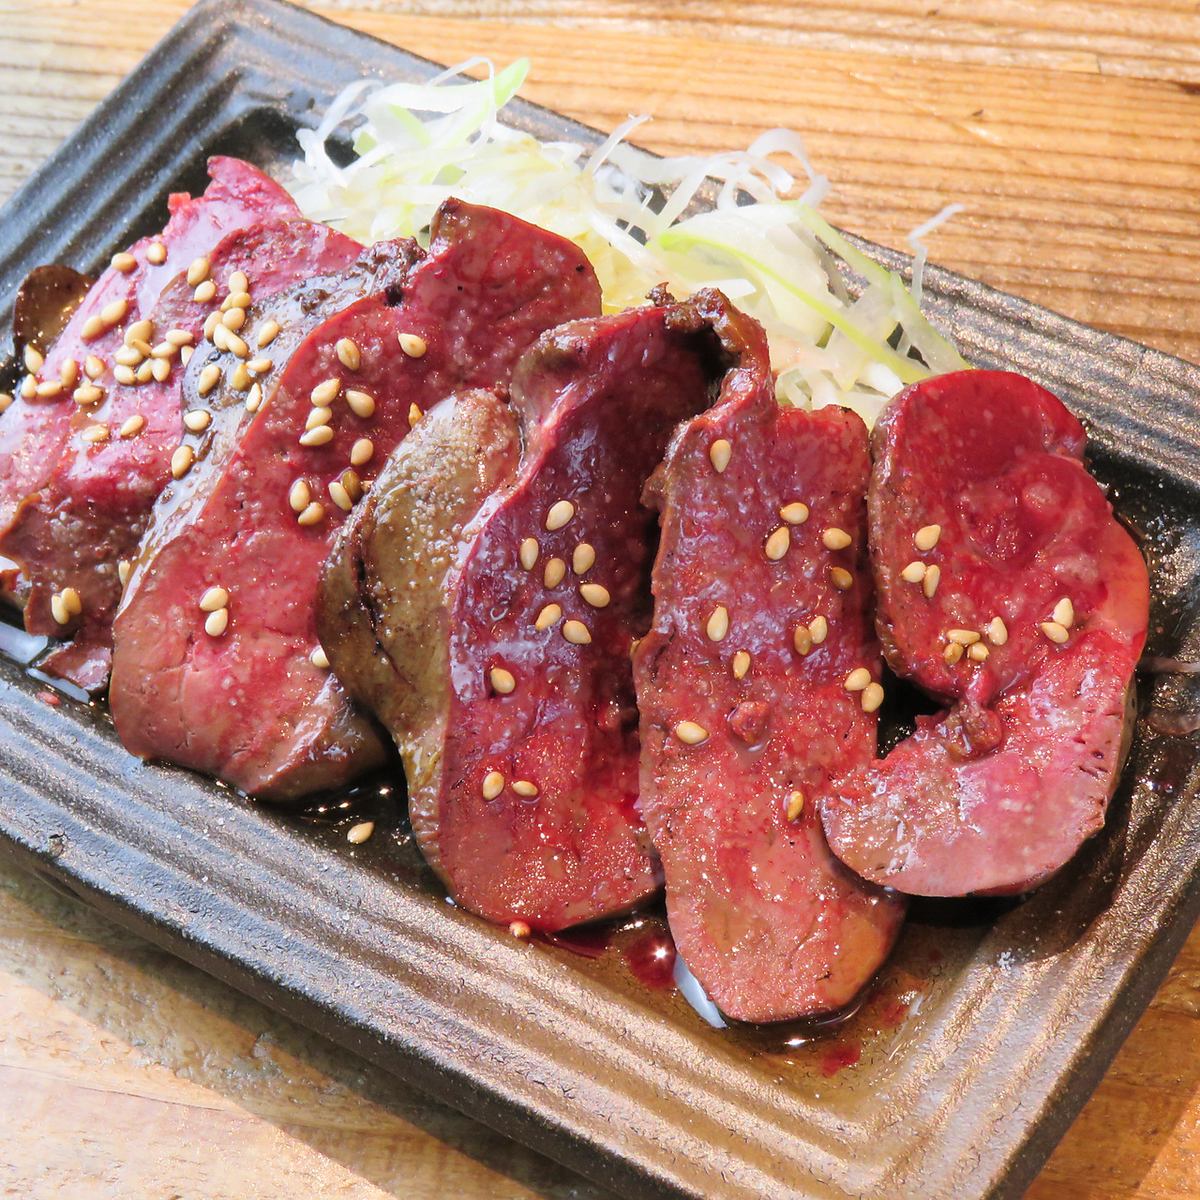 A 4-minute walk from Kyobashi! An izakaya where you can enjoy the ingredients of Saga Prefecture♪